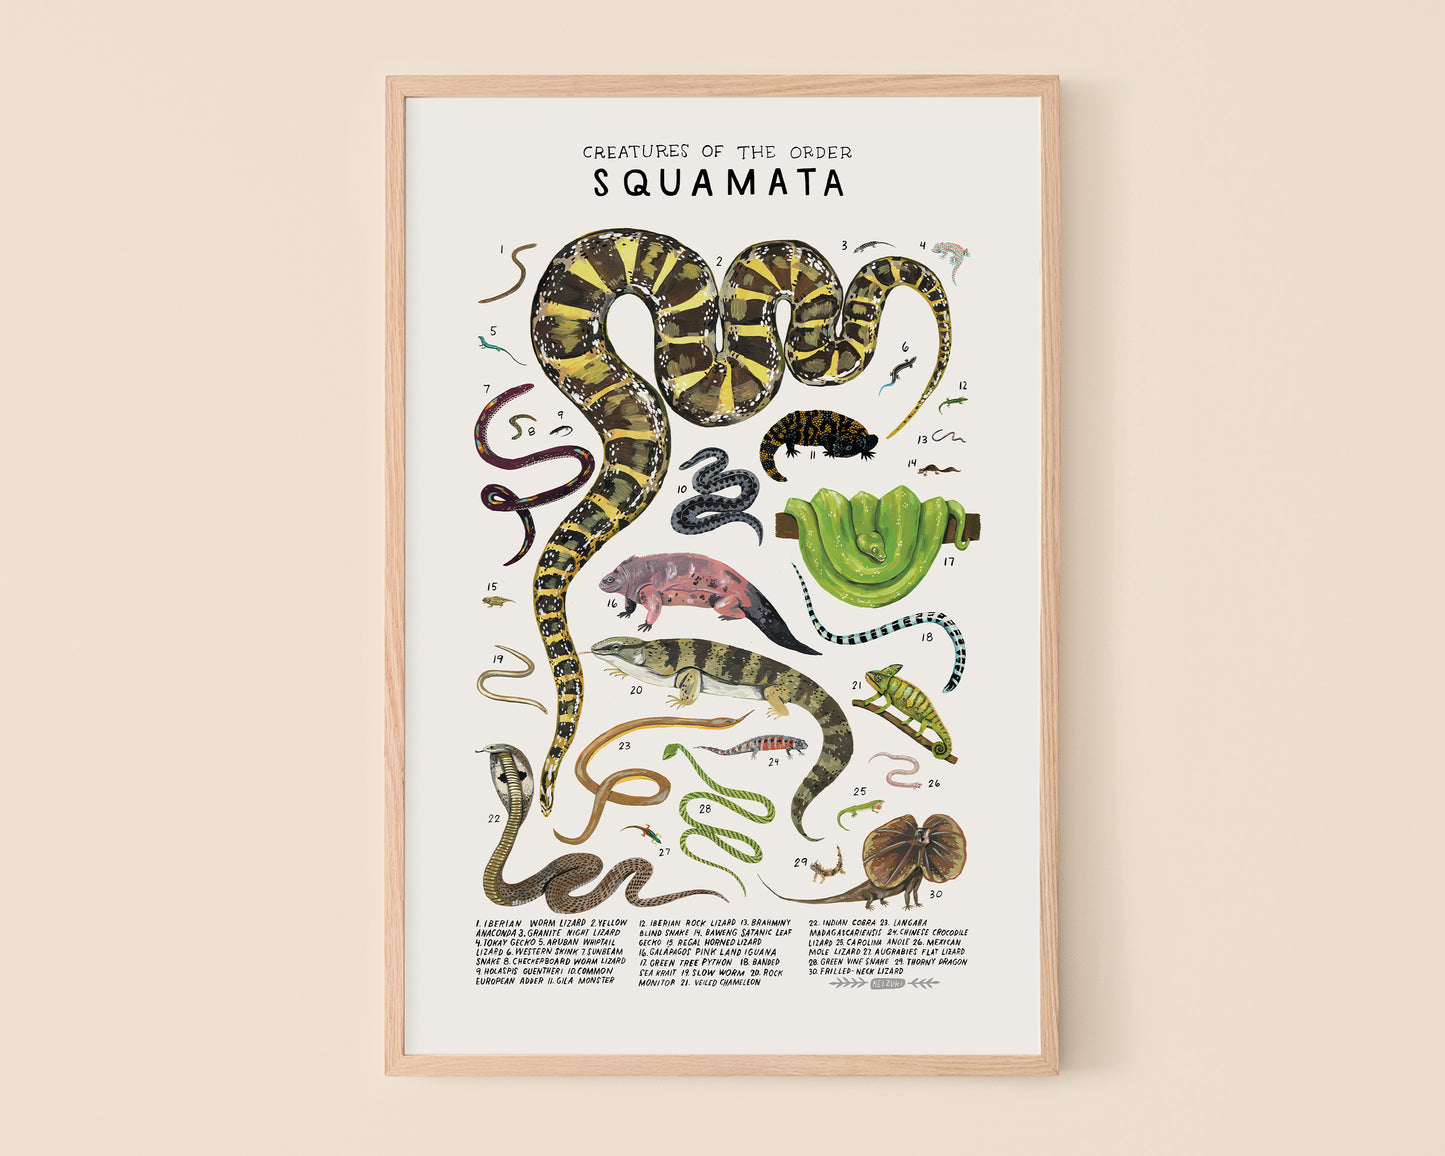 Snakes art print- Creatures of the Order Squamata